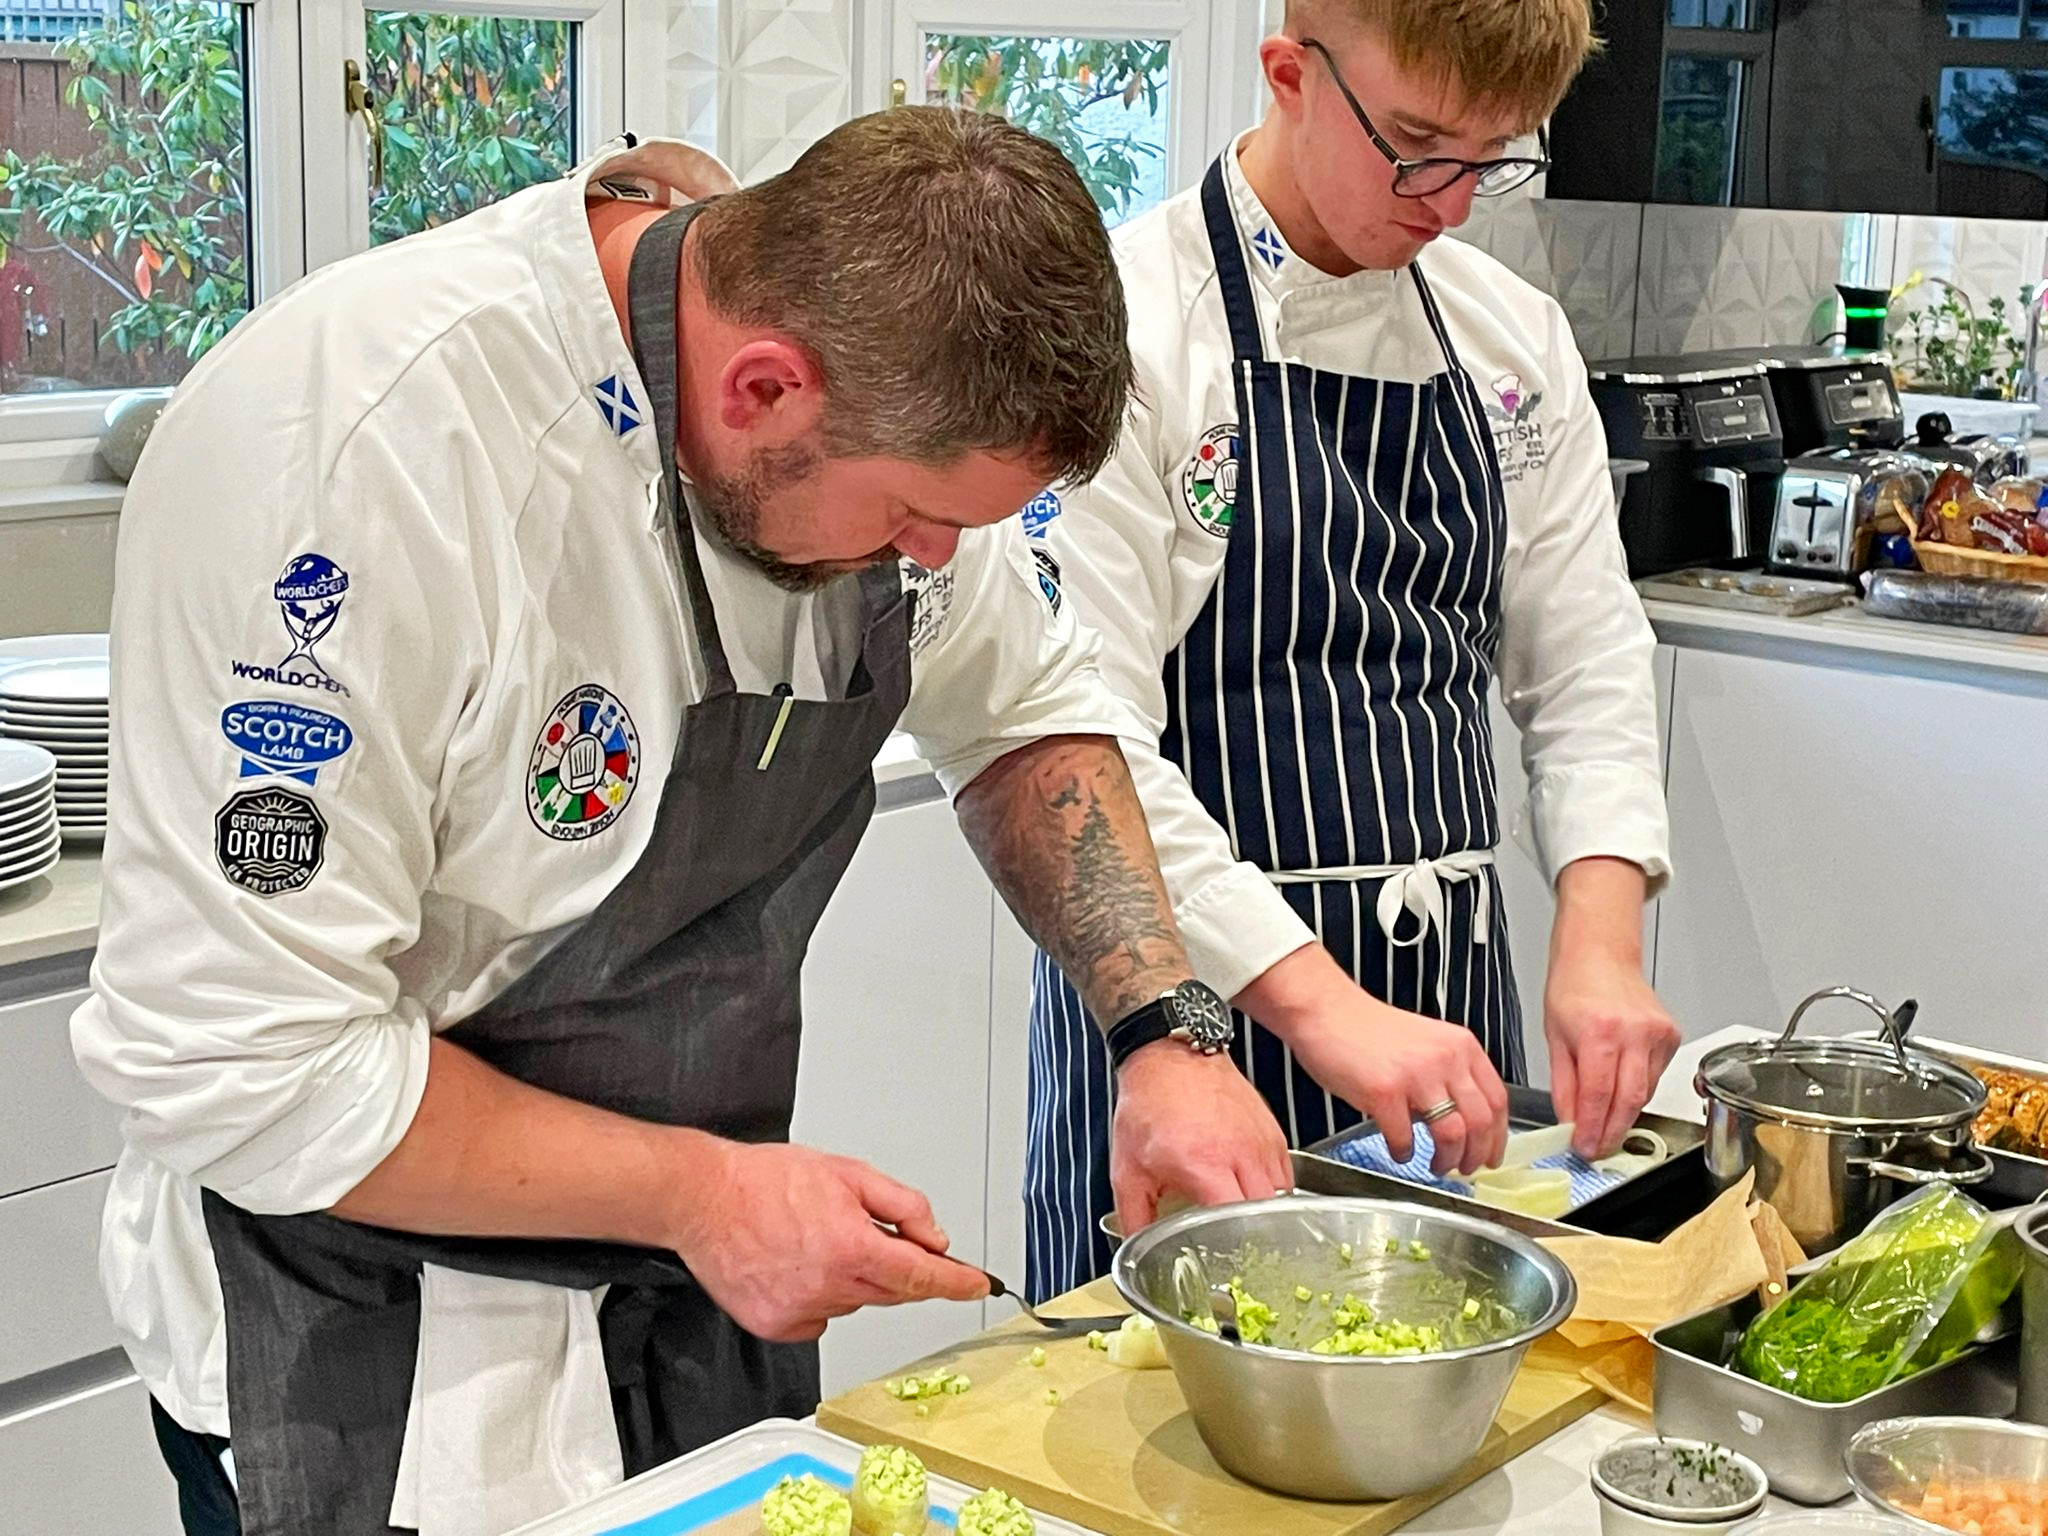 Simon Perkins prepares food with the Scottish Culinary Team